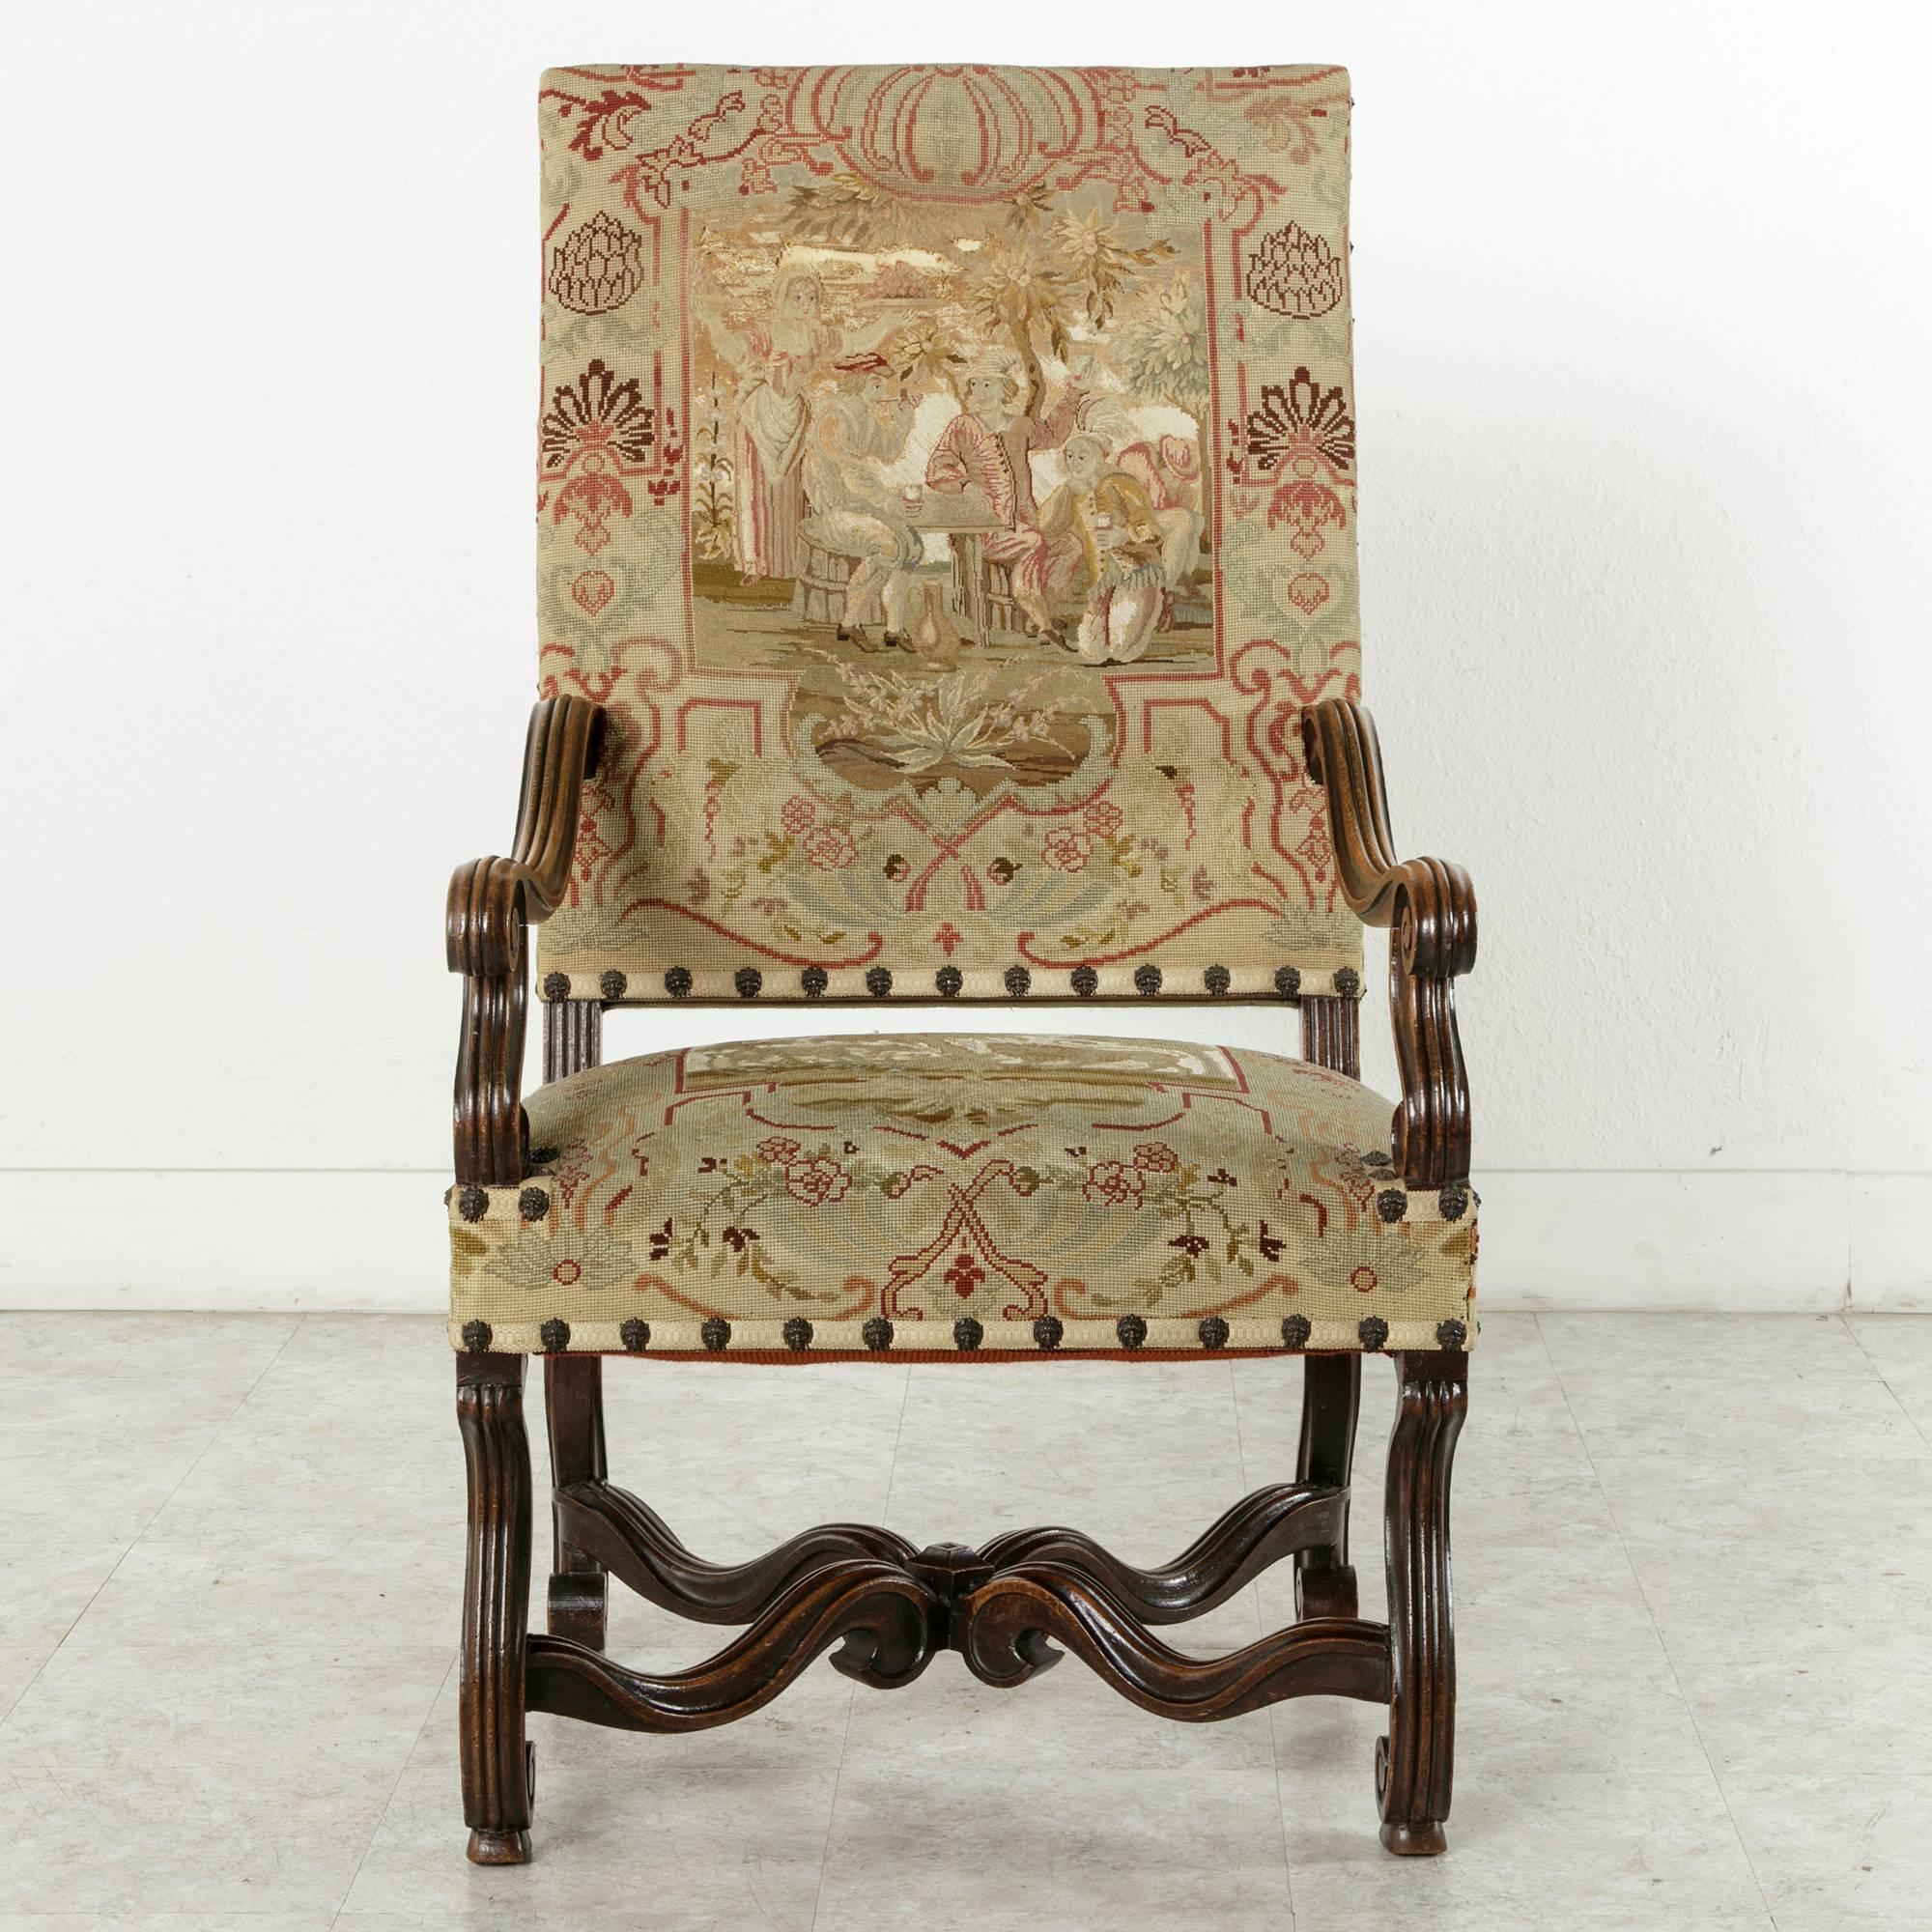 This nineteenth century hand carved walnut armchair in the Louis XIV style features fluted arms and legs.  Its four curved fluted stretchers extend from each leg to meet in the center, providing extra strength and support to the frame.    The